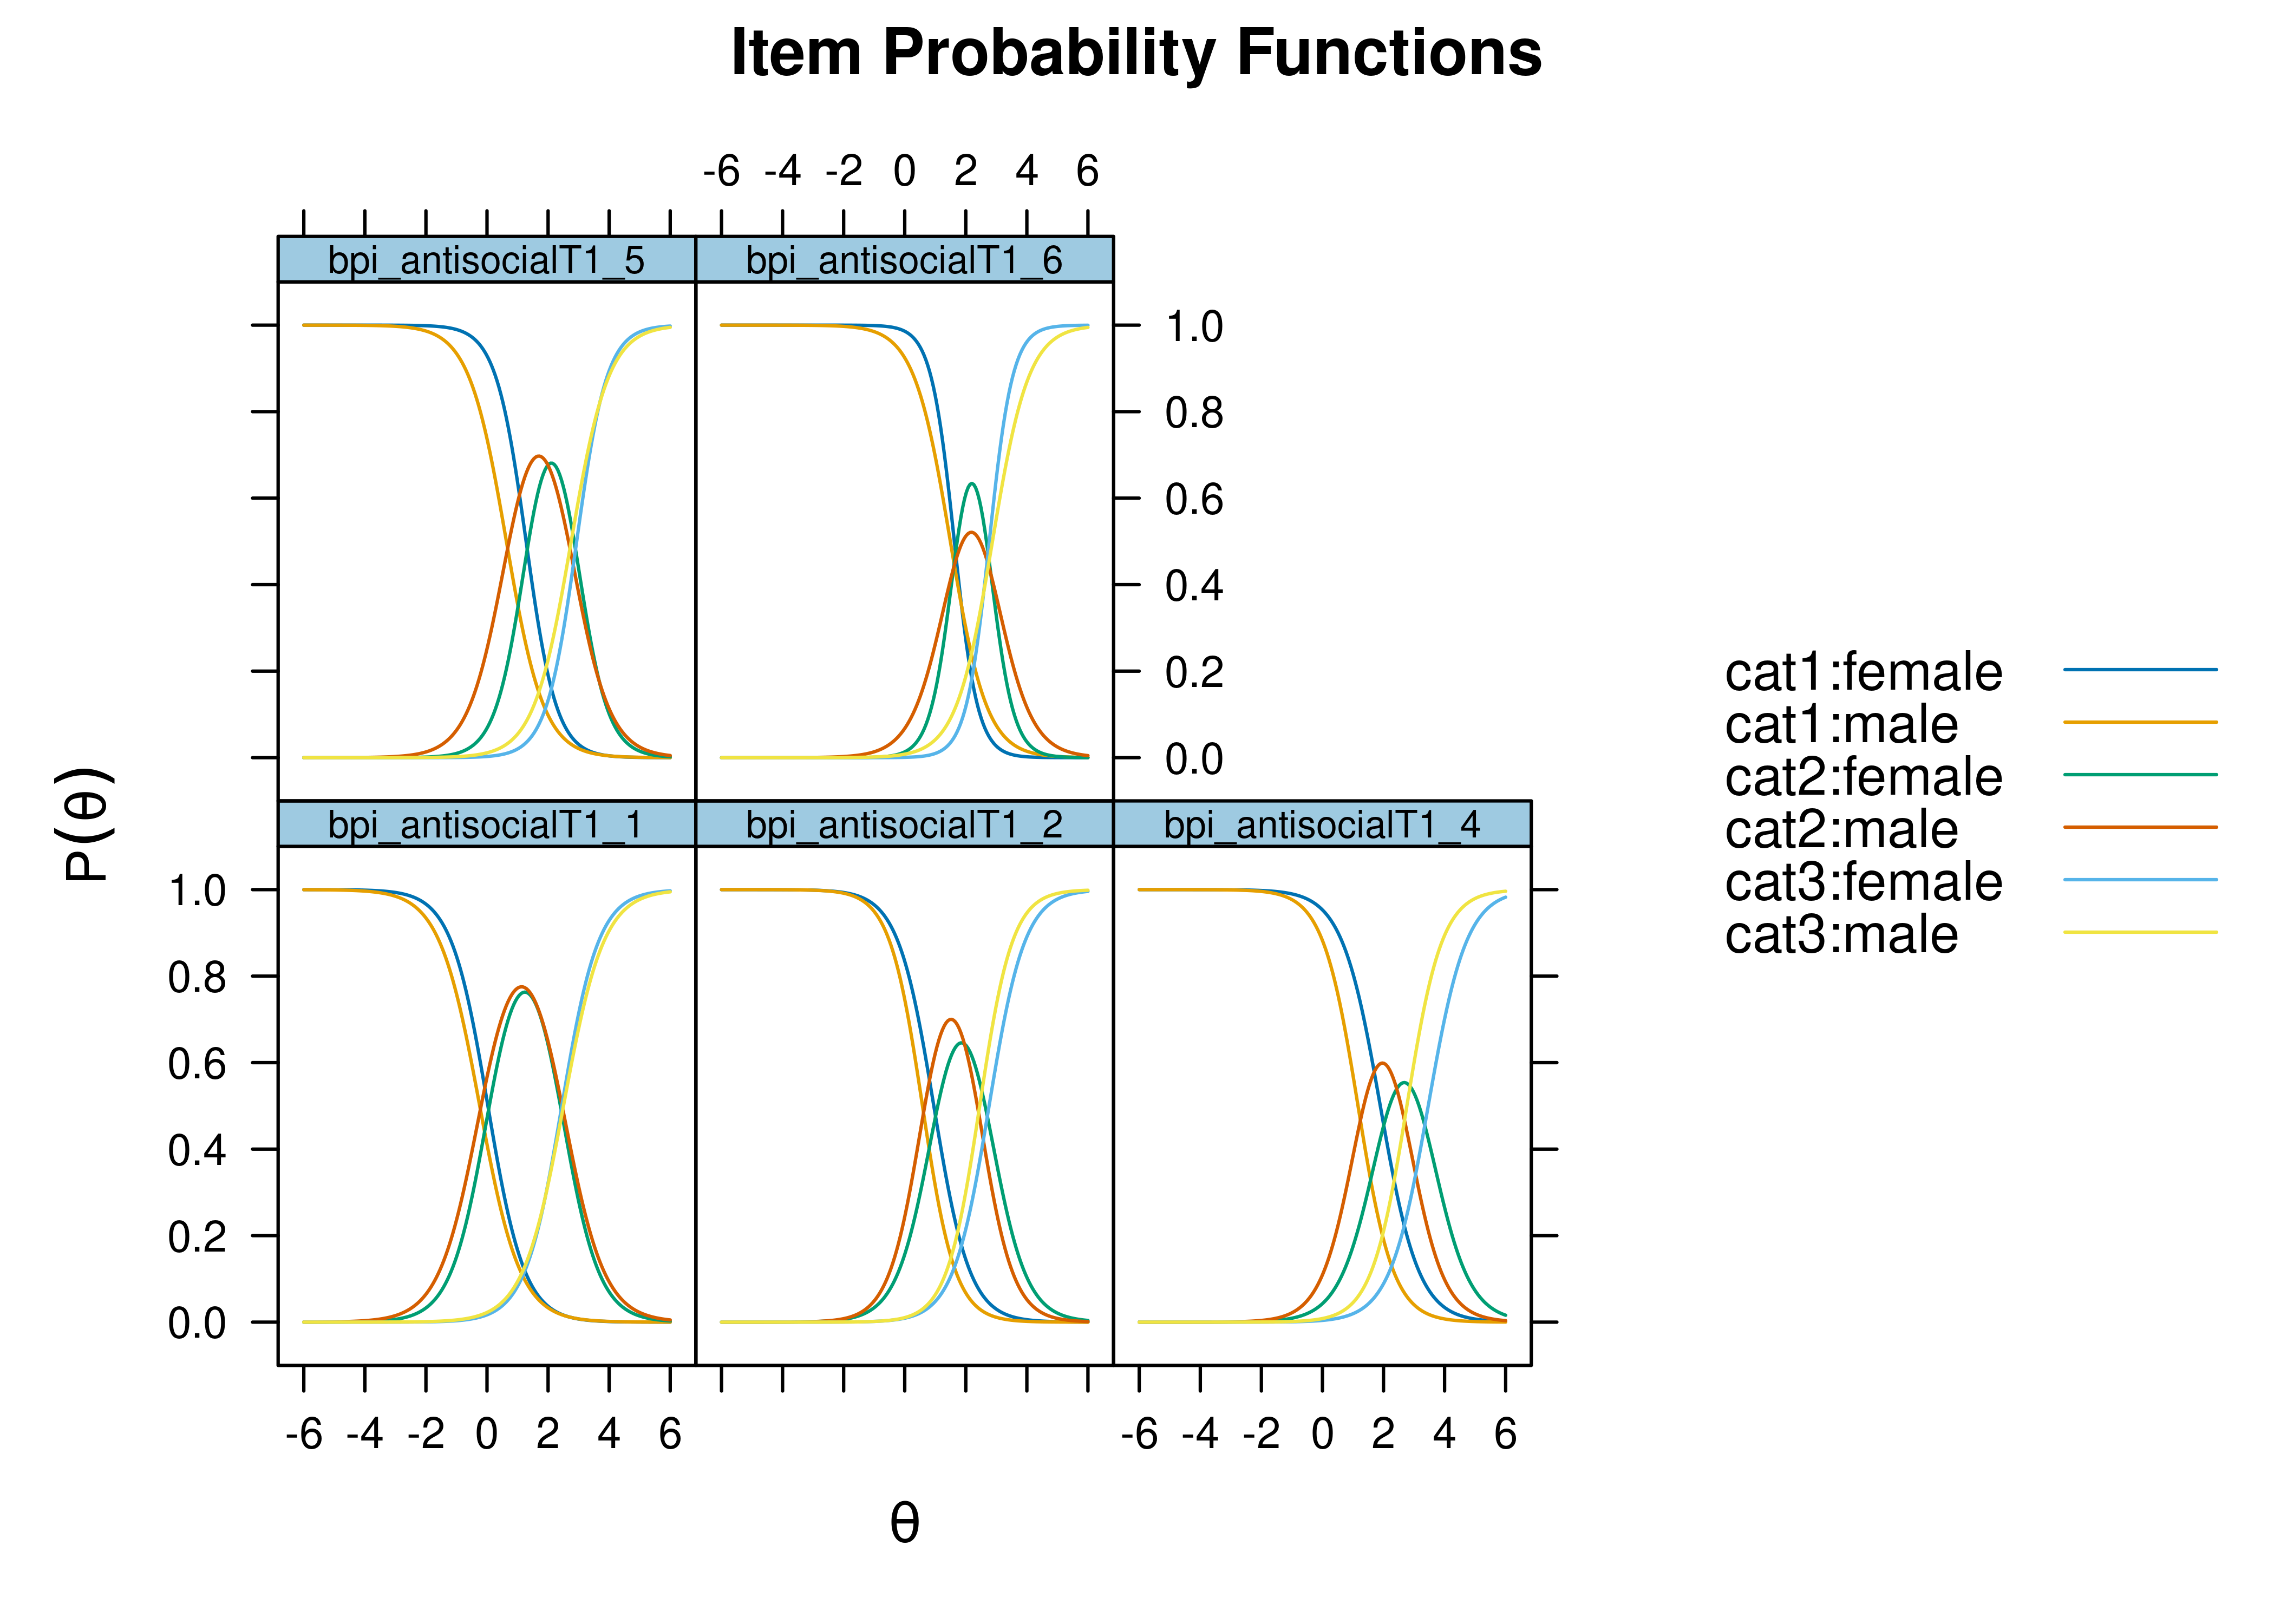 Item Probability Functions for Examining Differential Item Functioning in Terms of Discrimination and/or Severity.